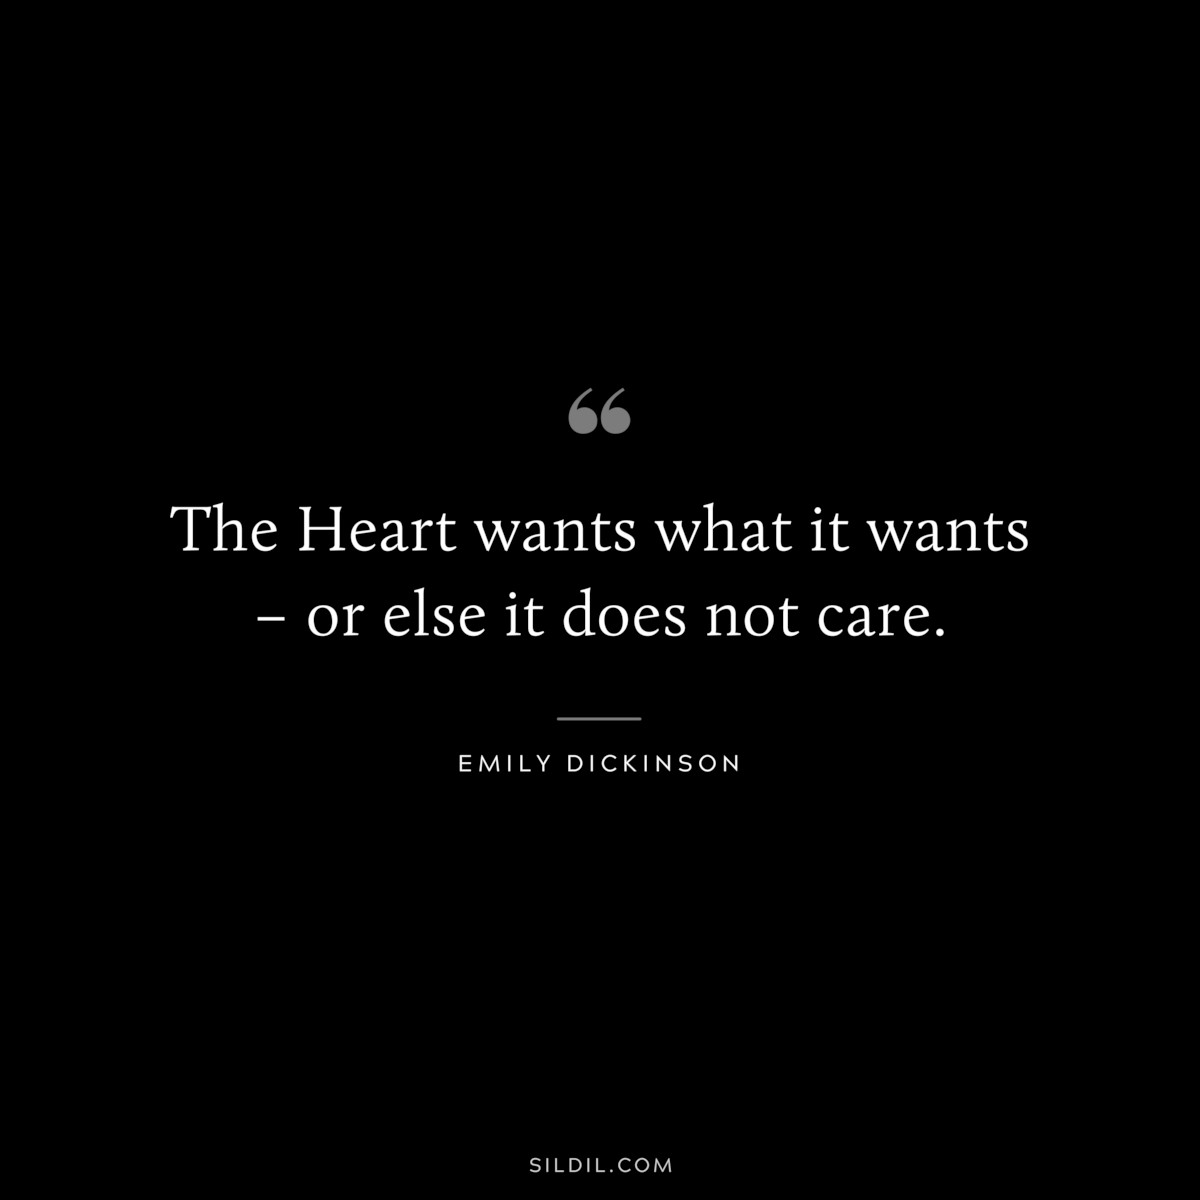 The Heart wants what it wants – or else it does not care.